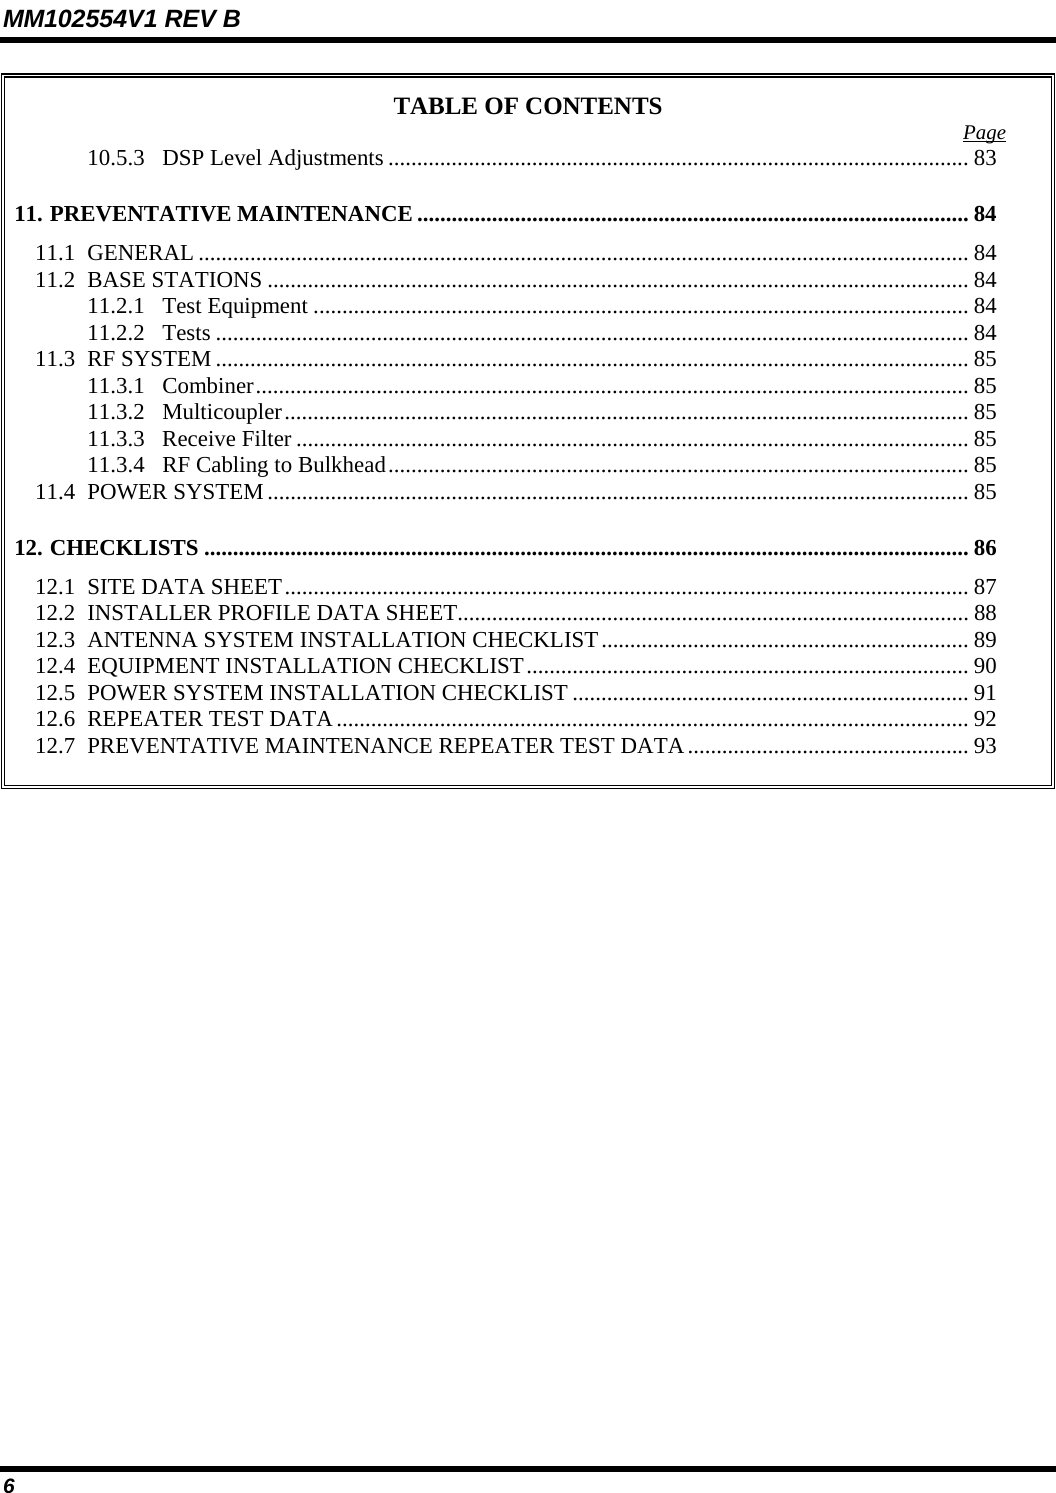 MM102554V1 REV B 6   TABLE OF CONTENTS  Page 10.5.3  DSP Level Adjustments ..................................................................................................... 83 11. PREVENTATIVE MAINTENANCE ................................................................................................ 84 11.1 GENERAL ...................................................................................................................................... 84 11.2 BASE STATIONS .......................................................................................................................... 84 11.2.1 Test Equipment .................................................................................................................. 84 11.2.2 Tests ................................................................................................................................... 84 11.3 RF SYSTEM ................................................................................................................................... 85 11.3.1 Combiner............................................................................................................................ 85 11.3.2 Multicoupler....................................................................................................................... 85 11.3.3 Receive Filter ..................................................................................................................... 85 11.3.4  RF Cabling to Bulkhead..................................................................................................... 85 11.4 POWER SYSTEM.......................................................................................................................... 85 12. CHECKLISTS ..................................................................................................................................... 86 12.1  SITE DATA SHEET....................................................................................................................... 87 12.2  INSTALLER PROFILE DATA SHEET......................................................................................... 88 12.3  ANTENNA SYSTEM INSTALLATION CHECKLIST................................................................ 89 12.4  EQUIPMENT INSTALLATION CHECKLIST............................................................................. 90 12.5  POWER SYSTEM INSTALLATION CHECKLIST ..................................................................... 91 12.6  REPEATER TEST DATA .............................................................................................................. 92 12.7  PREVENTATIVE MAINTENANCE REPEATER TEST DATA................................................. 93     